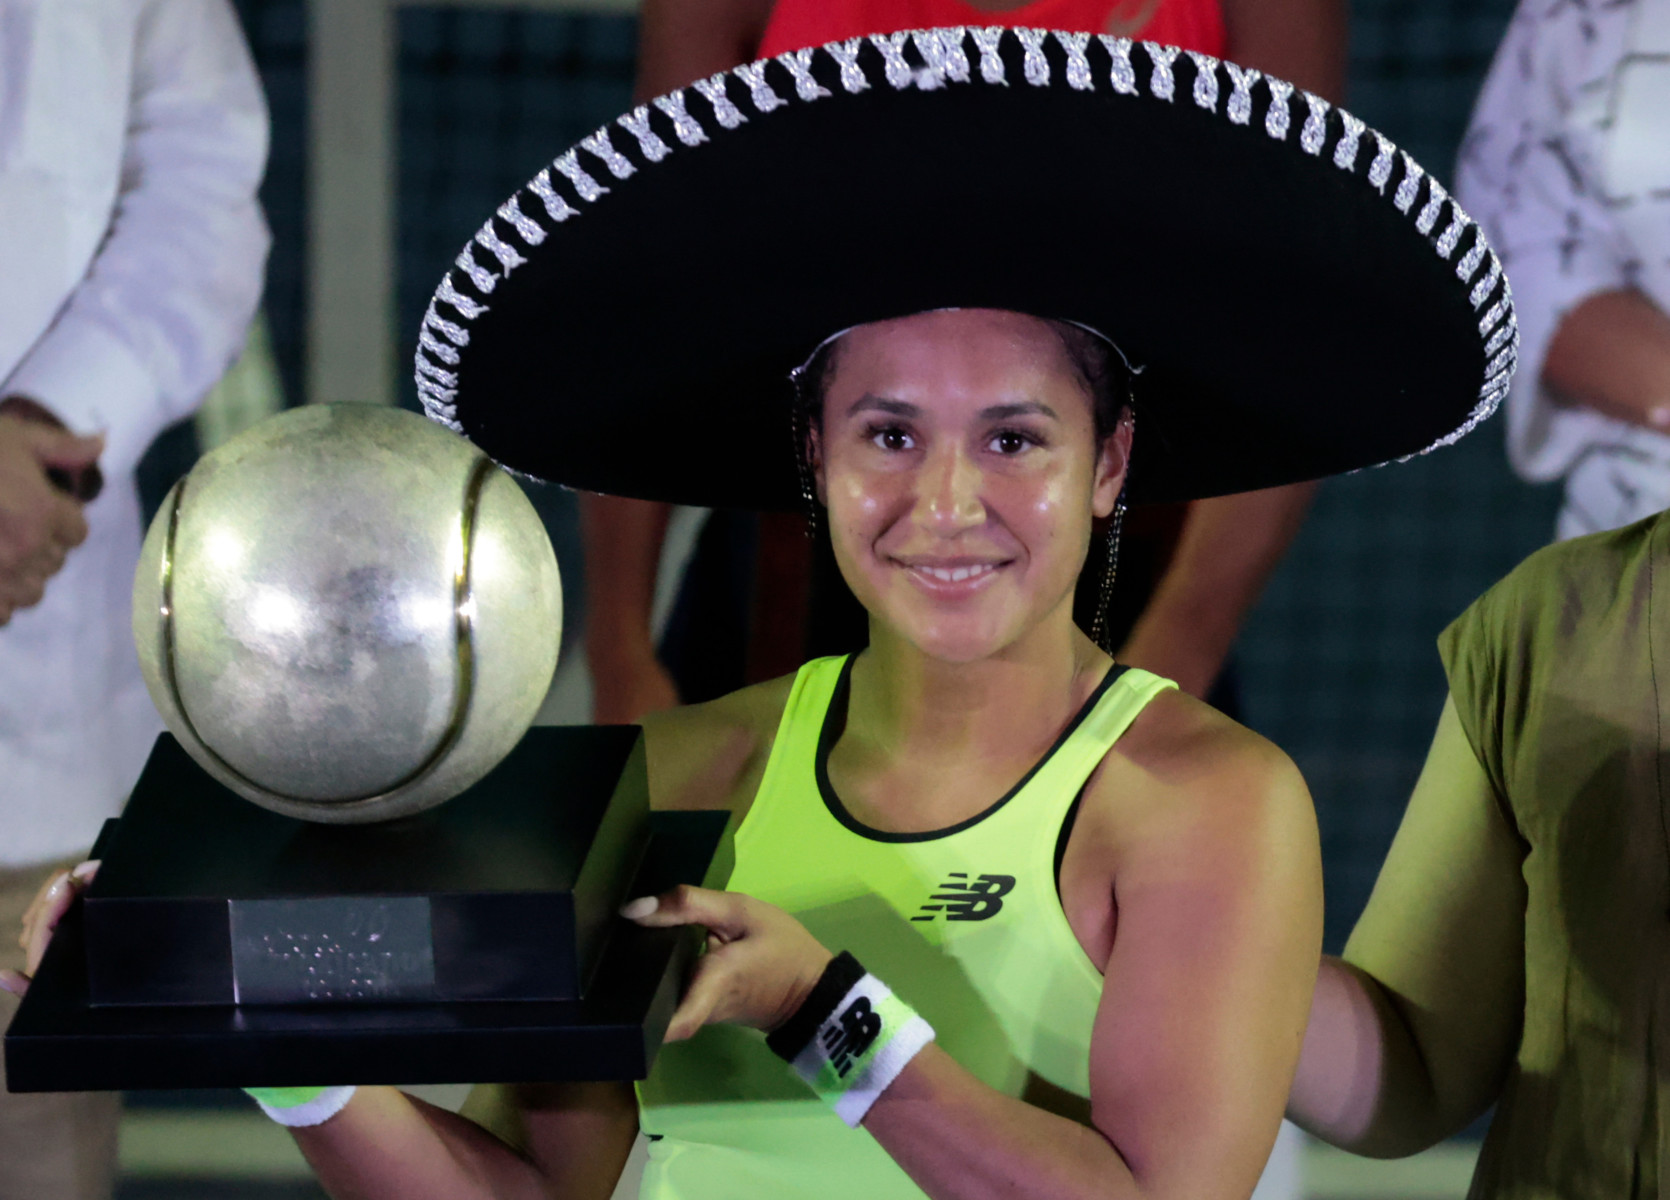 Heather Watson won the women's tournament to land her fourth career singles title and first since March 2016